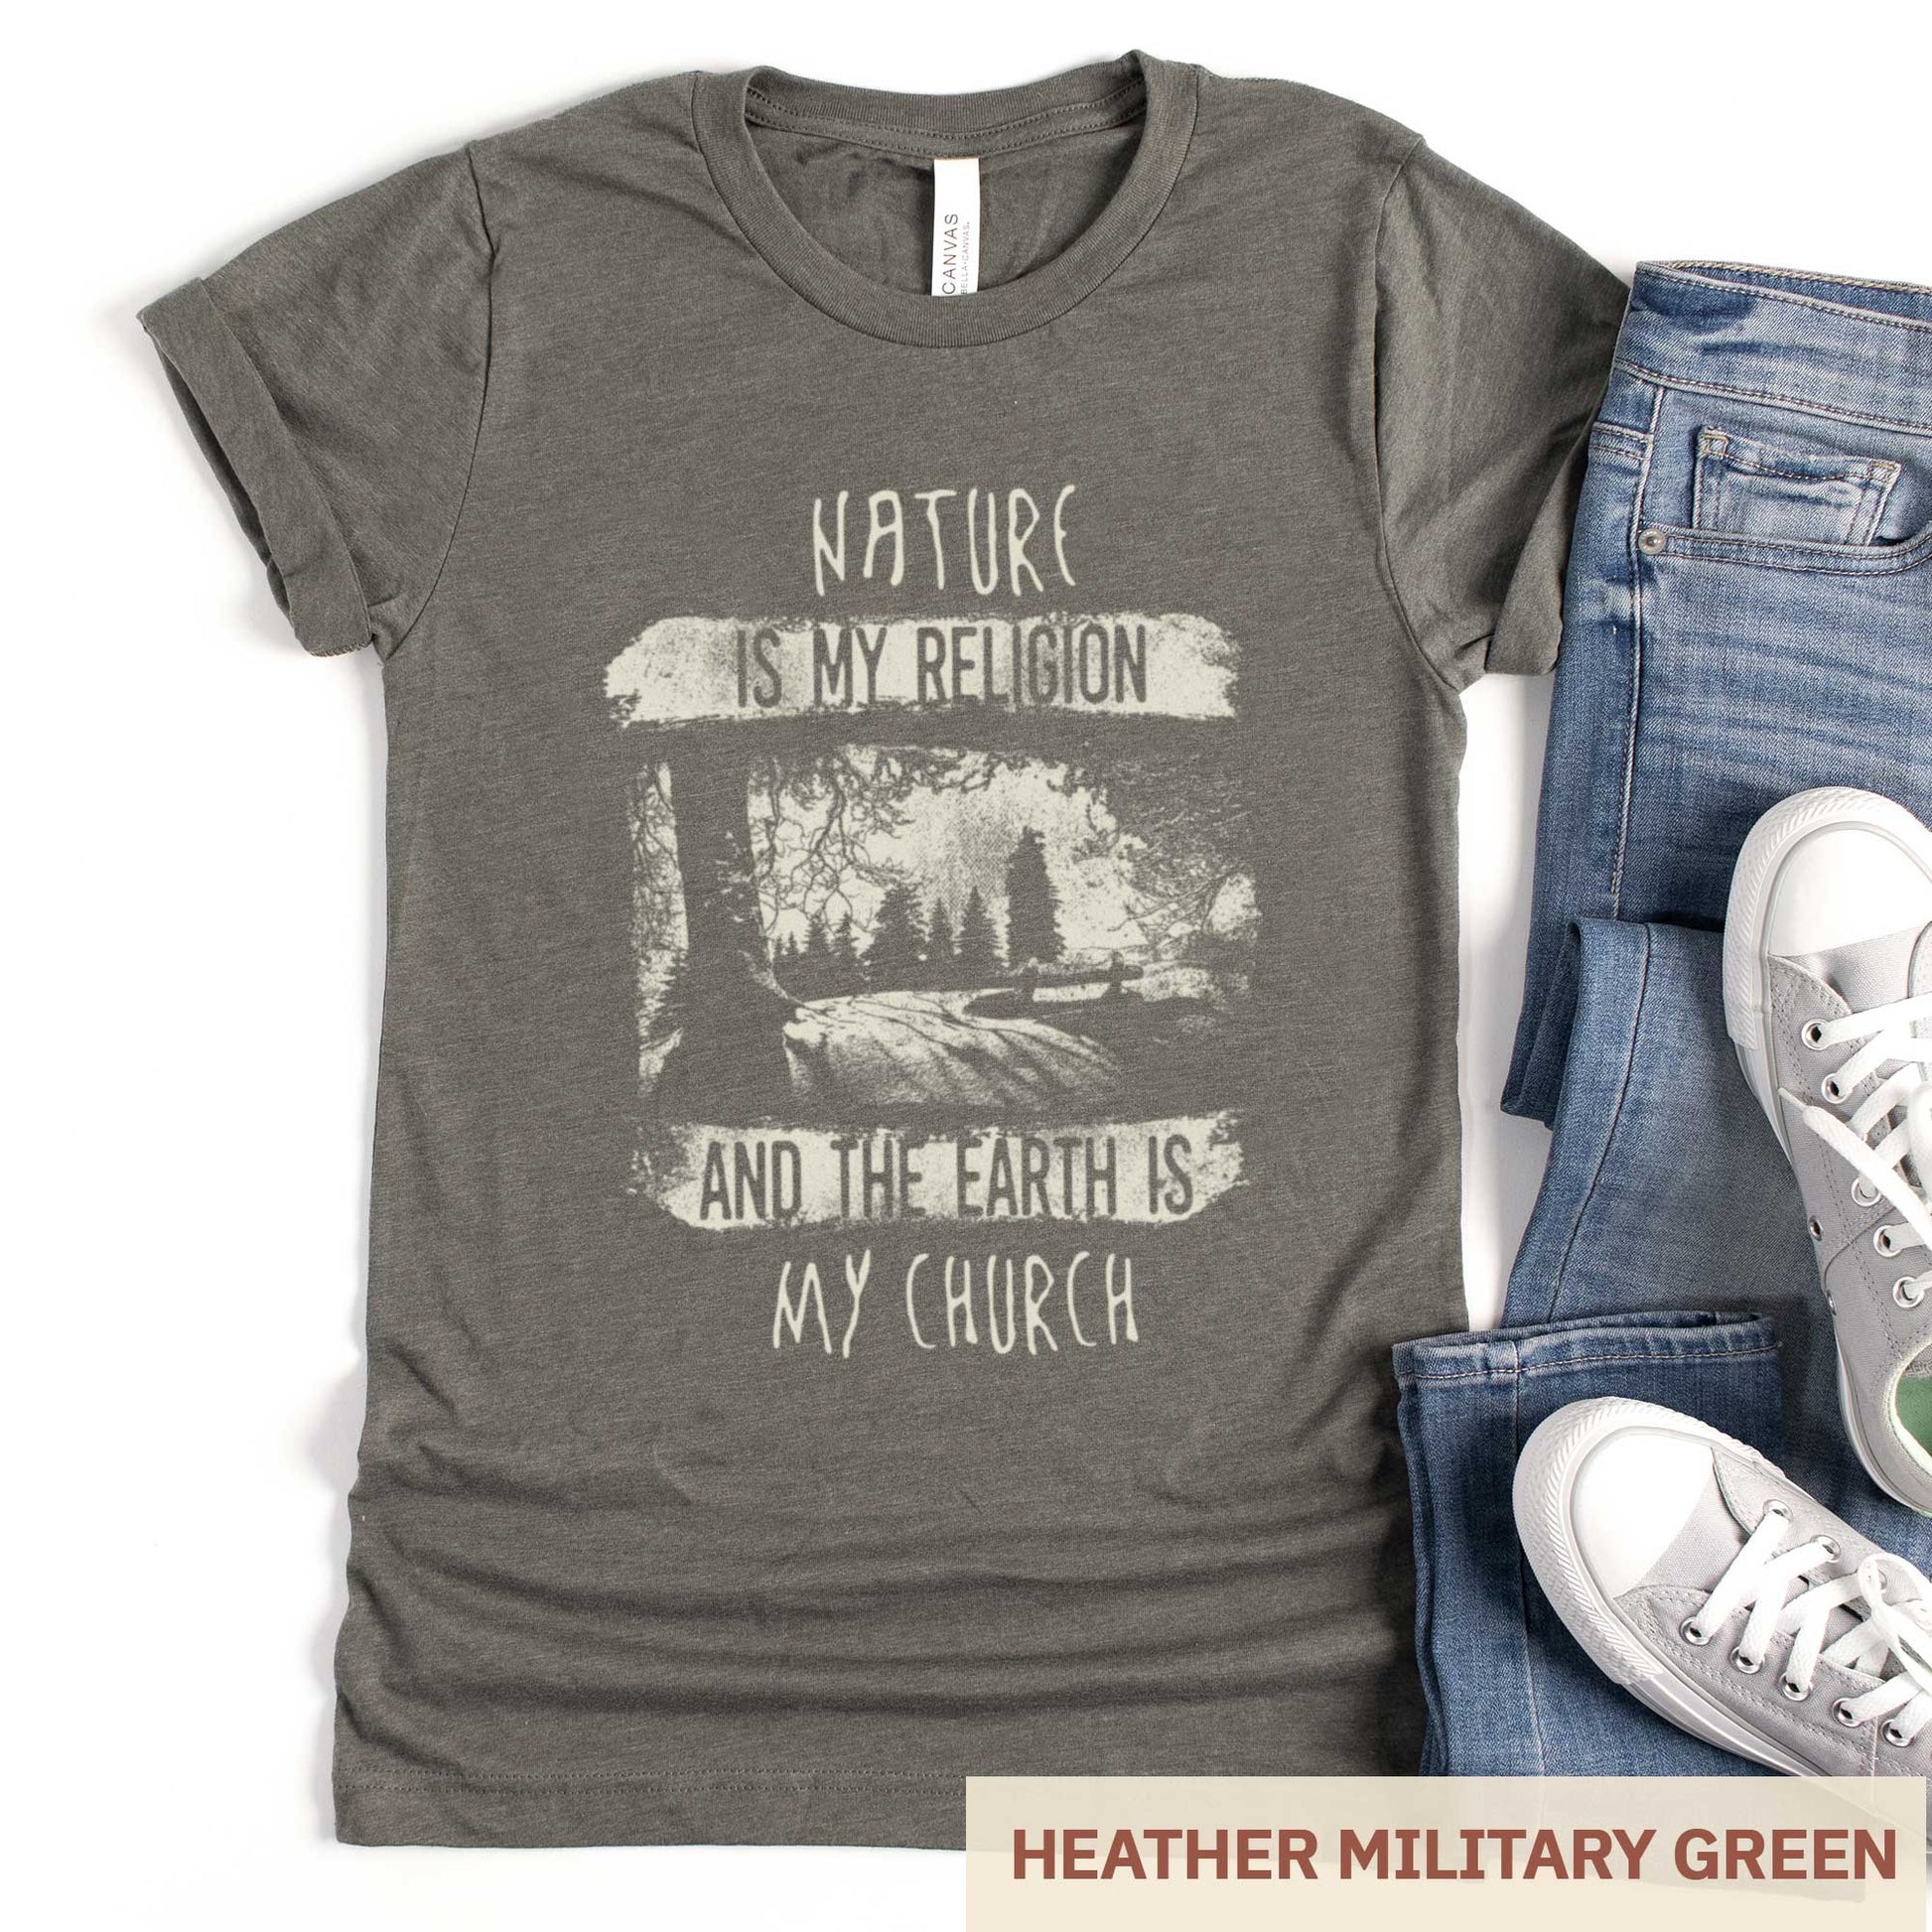 A heather military green Bella Canvas t-shirt featuring fields and a forest with the words nature is my religion and the earth is my church.